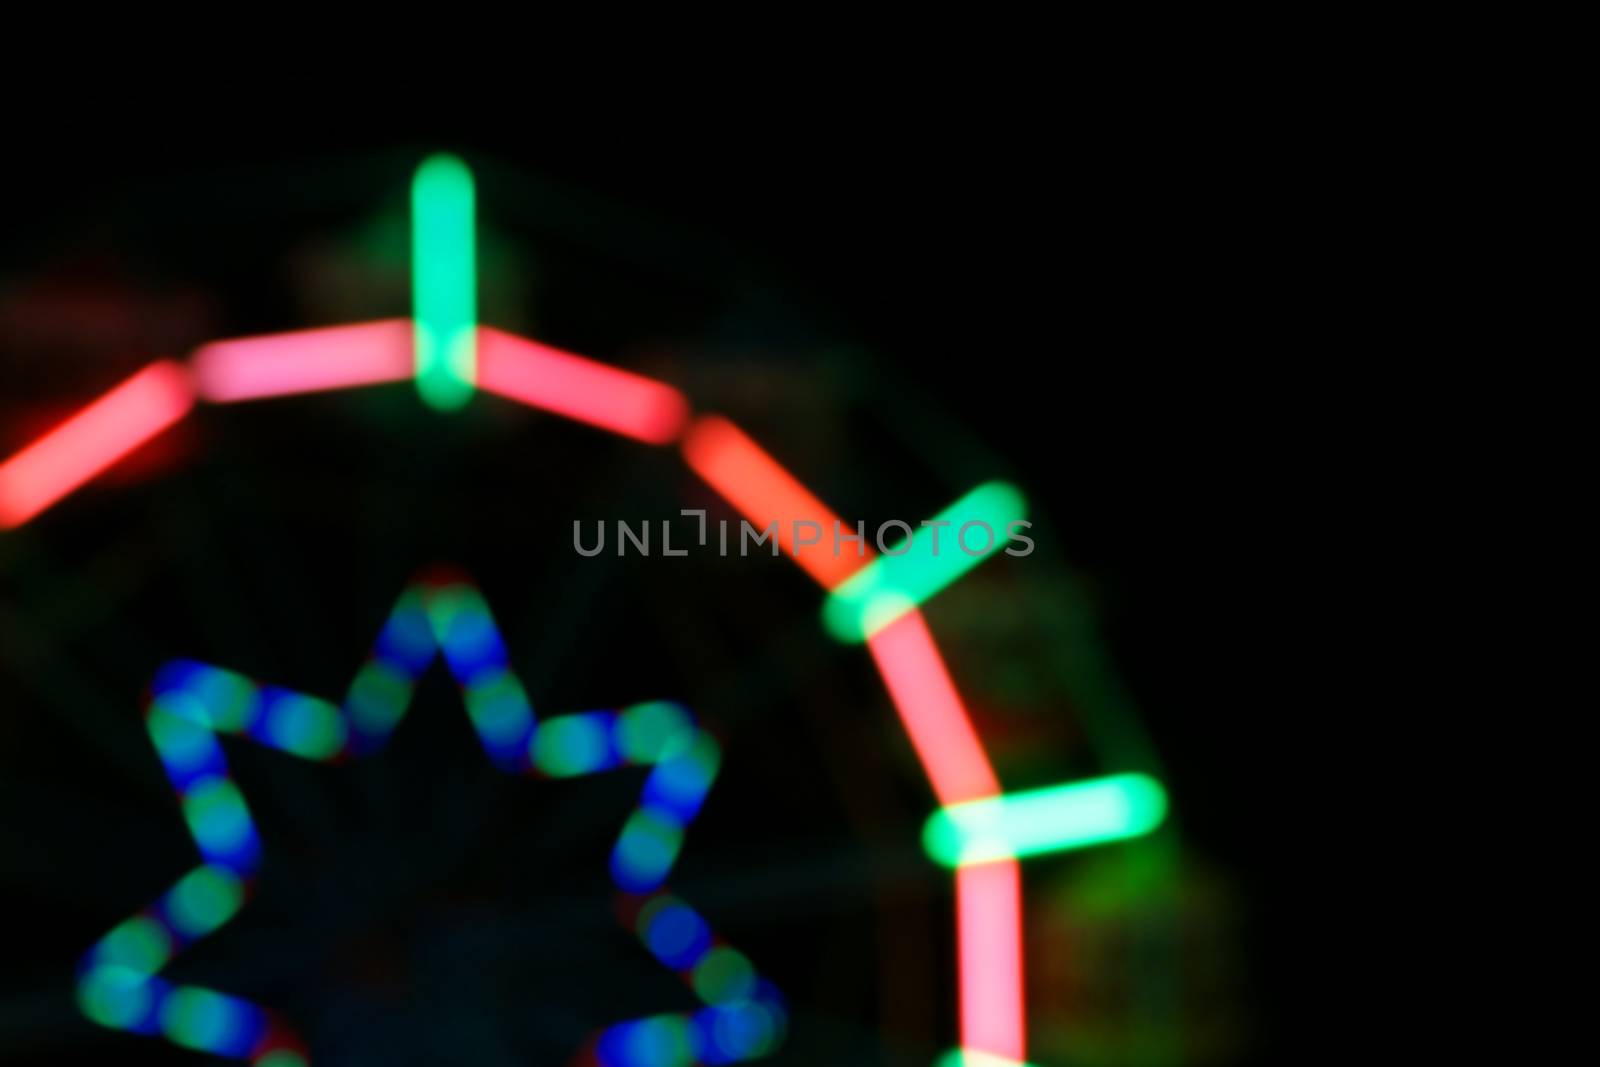 Defocused and blurred image of ferris wheel at amusement park at night for background usage. by mranucha